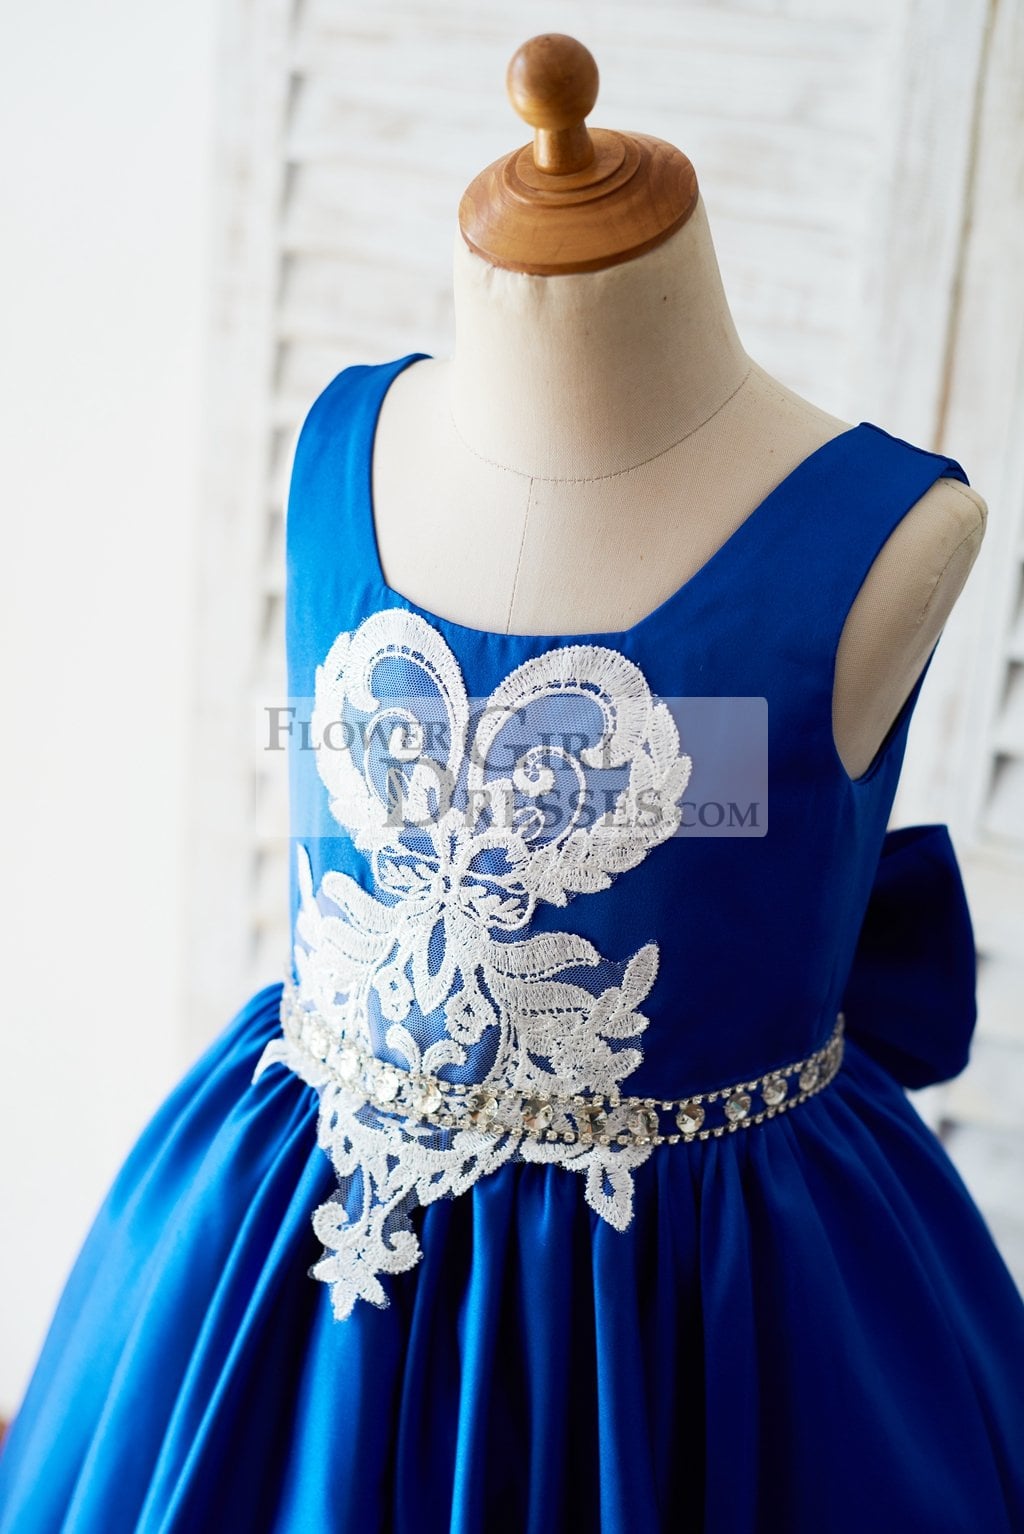 Royal Blue Satin Square Neck Wedding Party Flower Girl Dress with Lace Trim